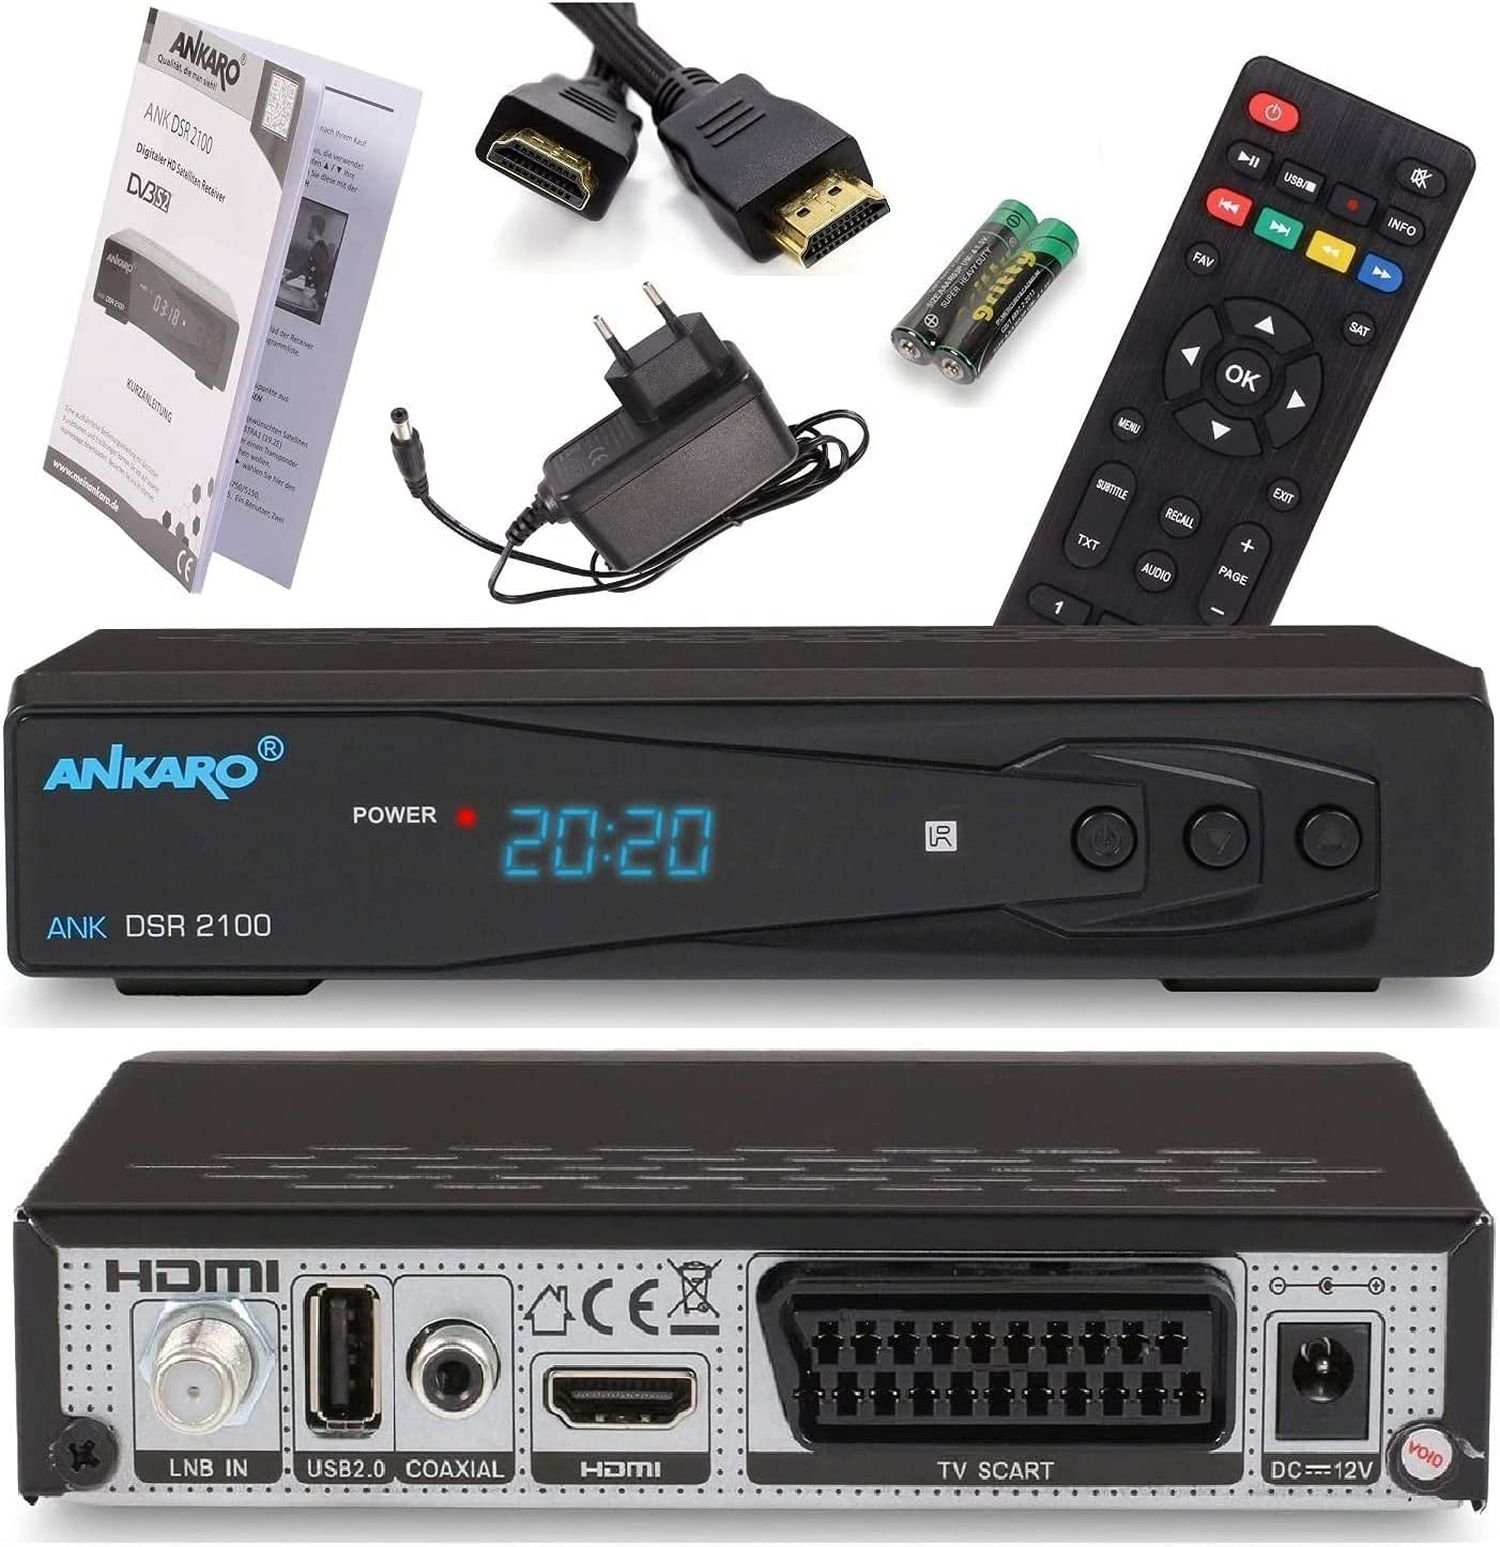 Ankaro 2100 DSR USB, SCART, Aufnahmefunktion - tauglich) & Unicable SAT-Receiver (PVR, Coaxial Kabel mit HDMI Timeshift HDMI, 